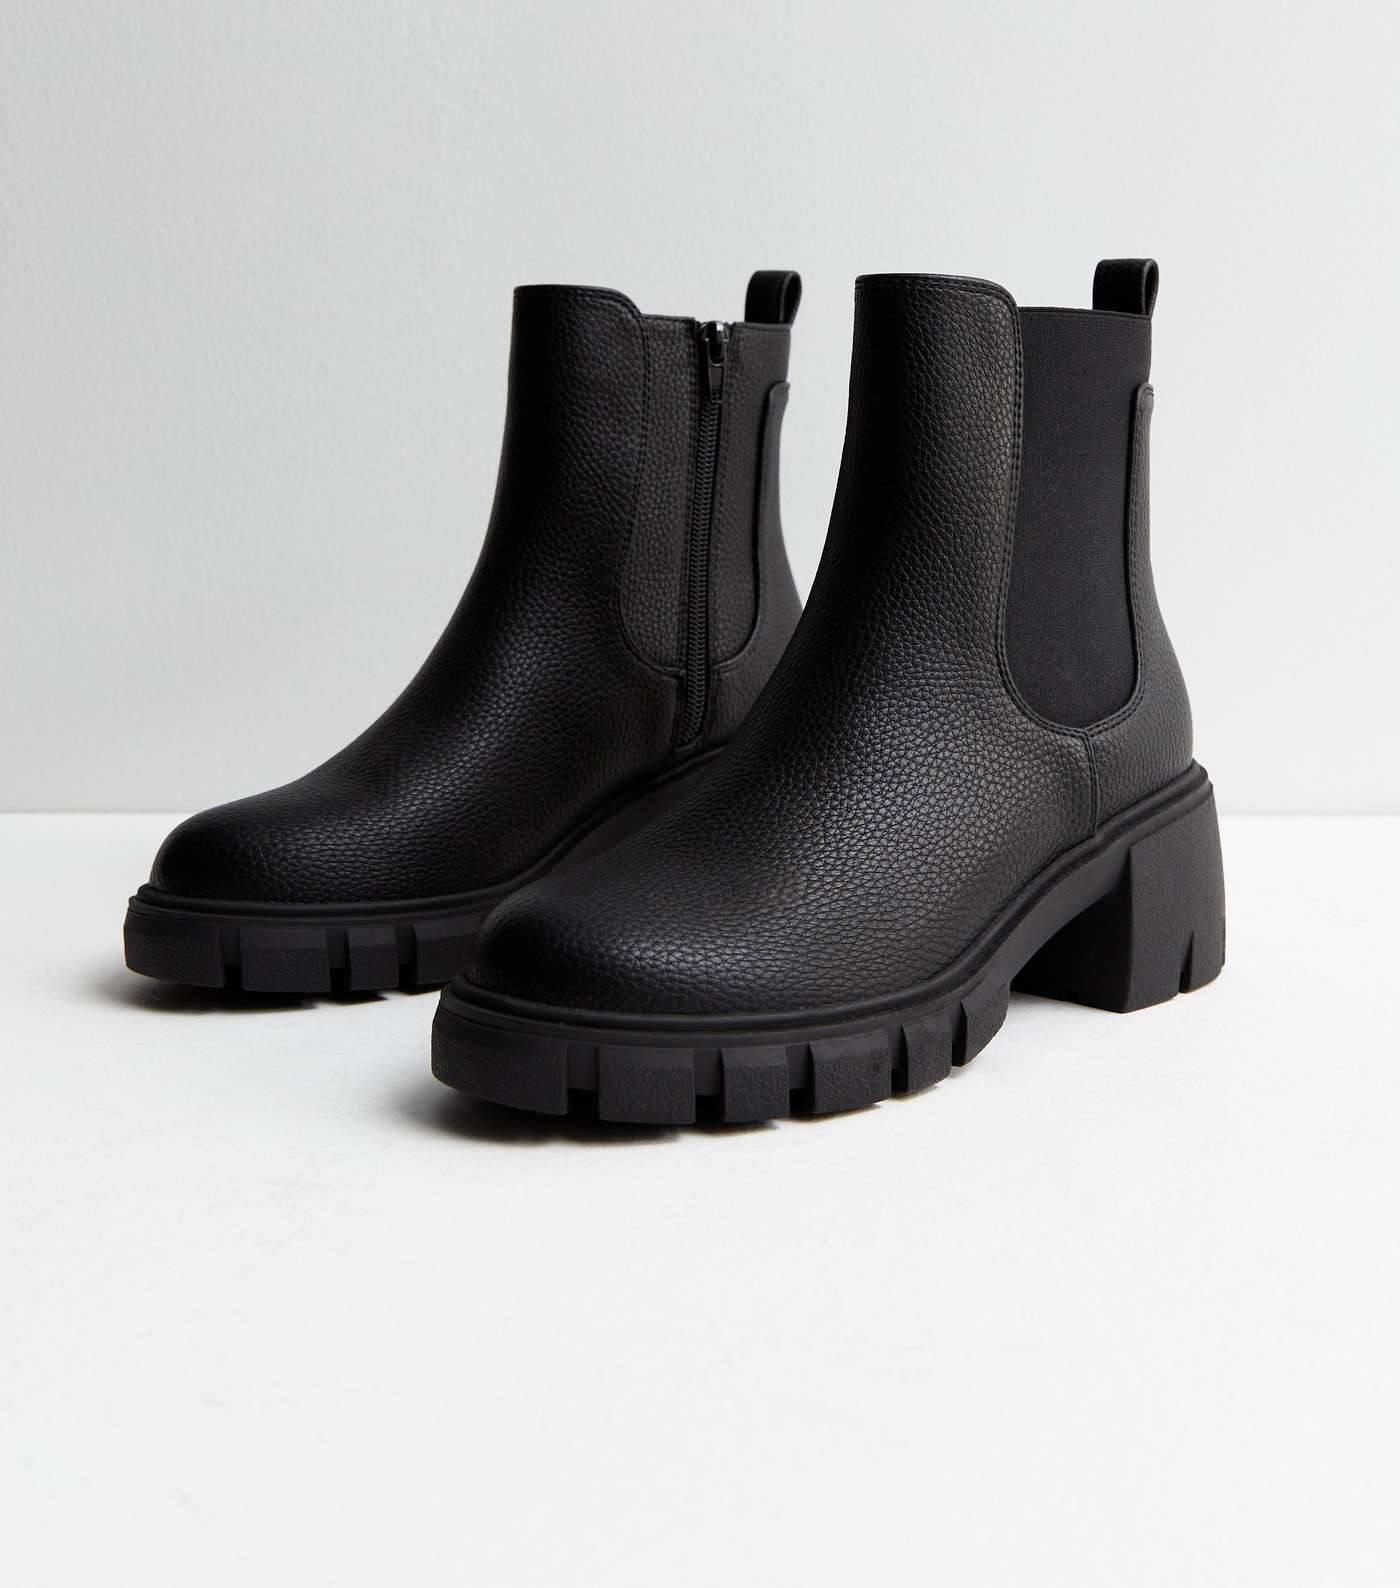 Black Leather-Look Cleated Block Heel Chelsea Boots Image 2